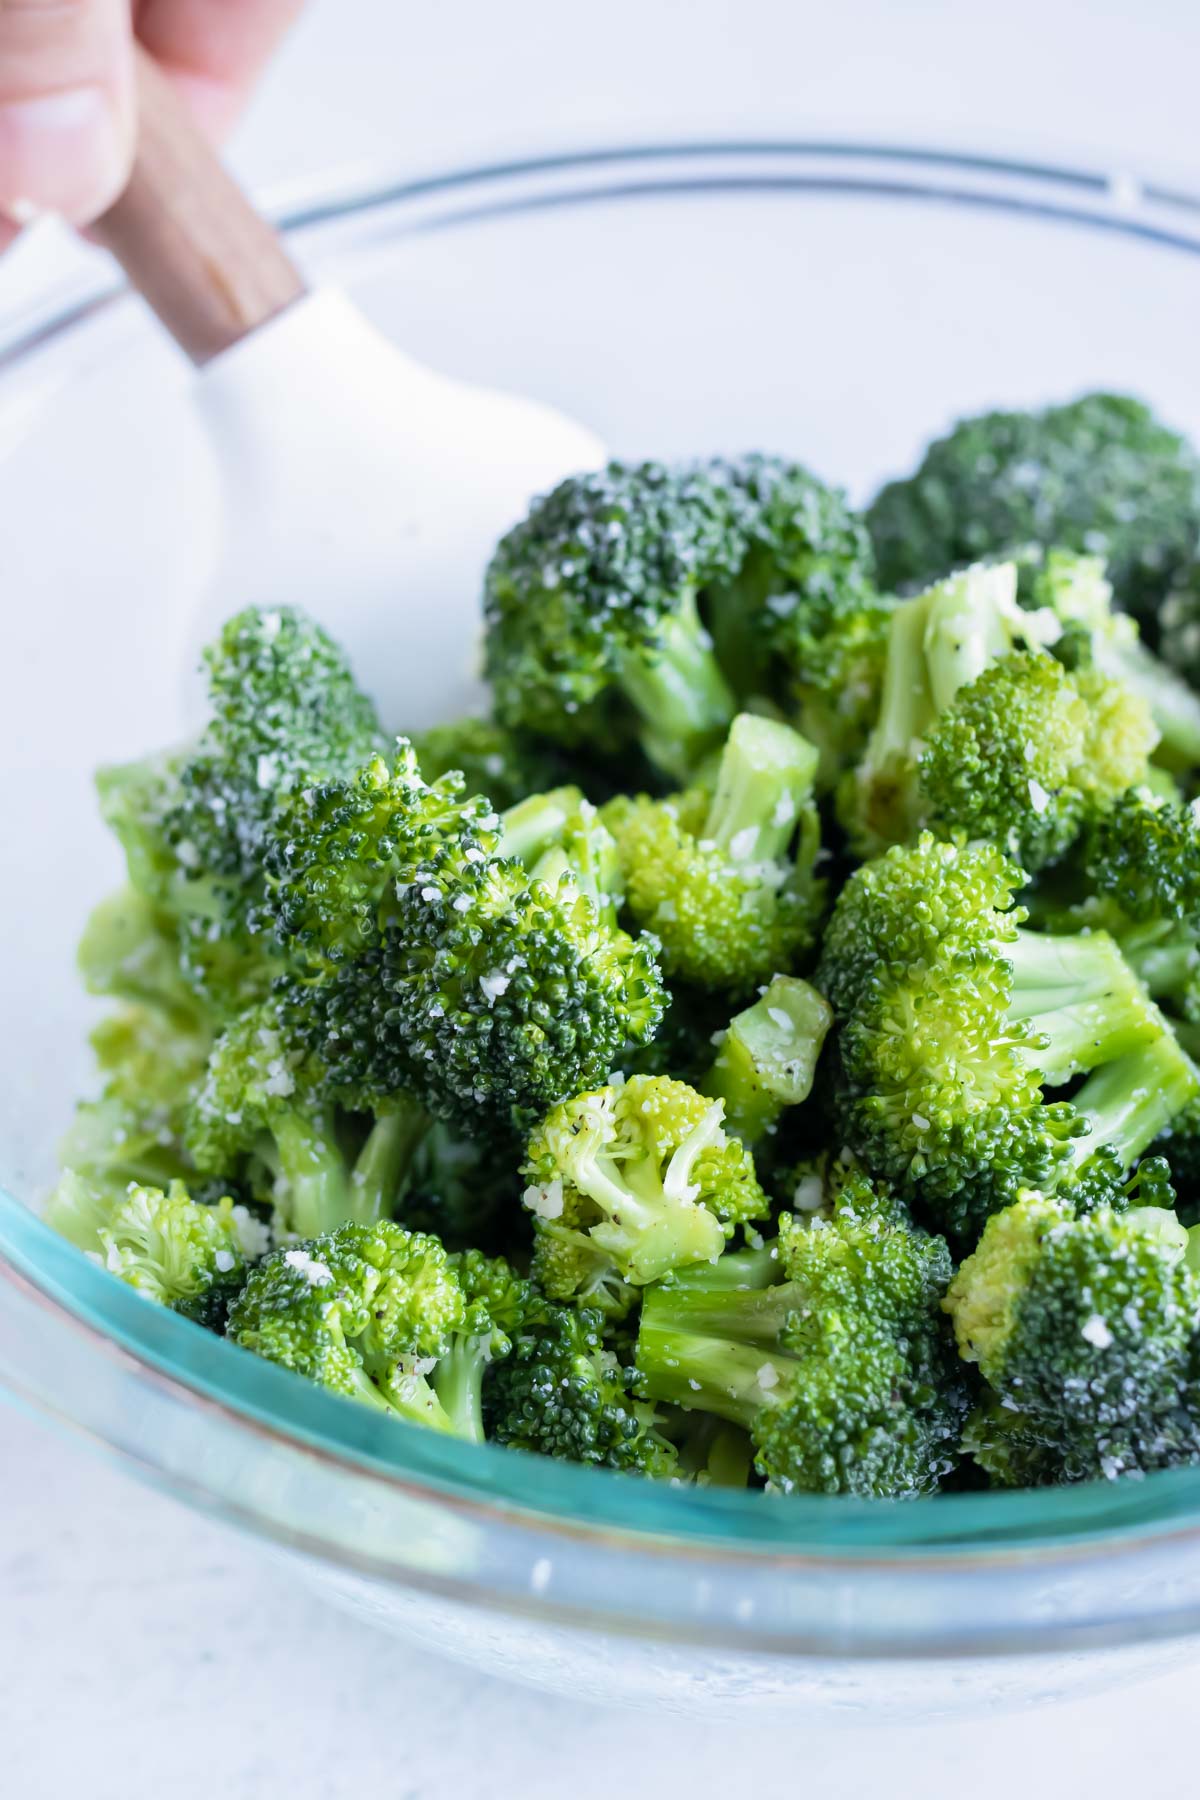 Broccoli florets are covered in an oil and garlic mixture.